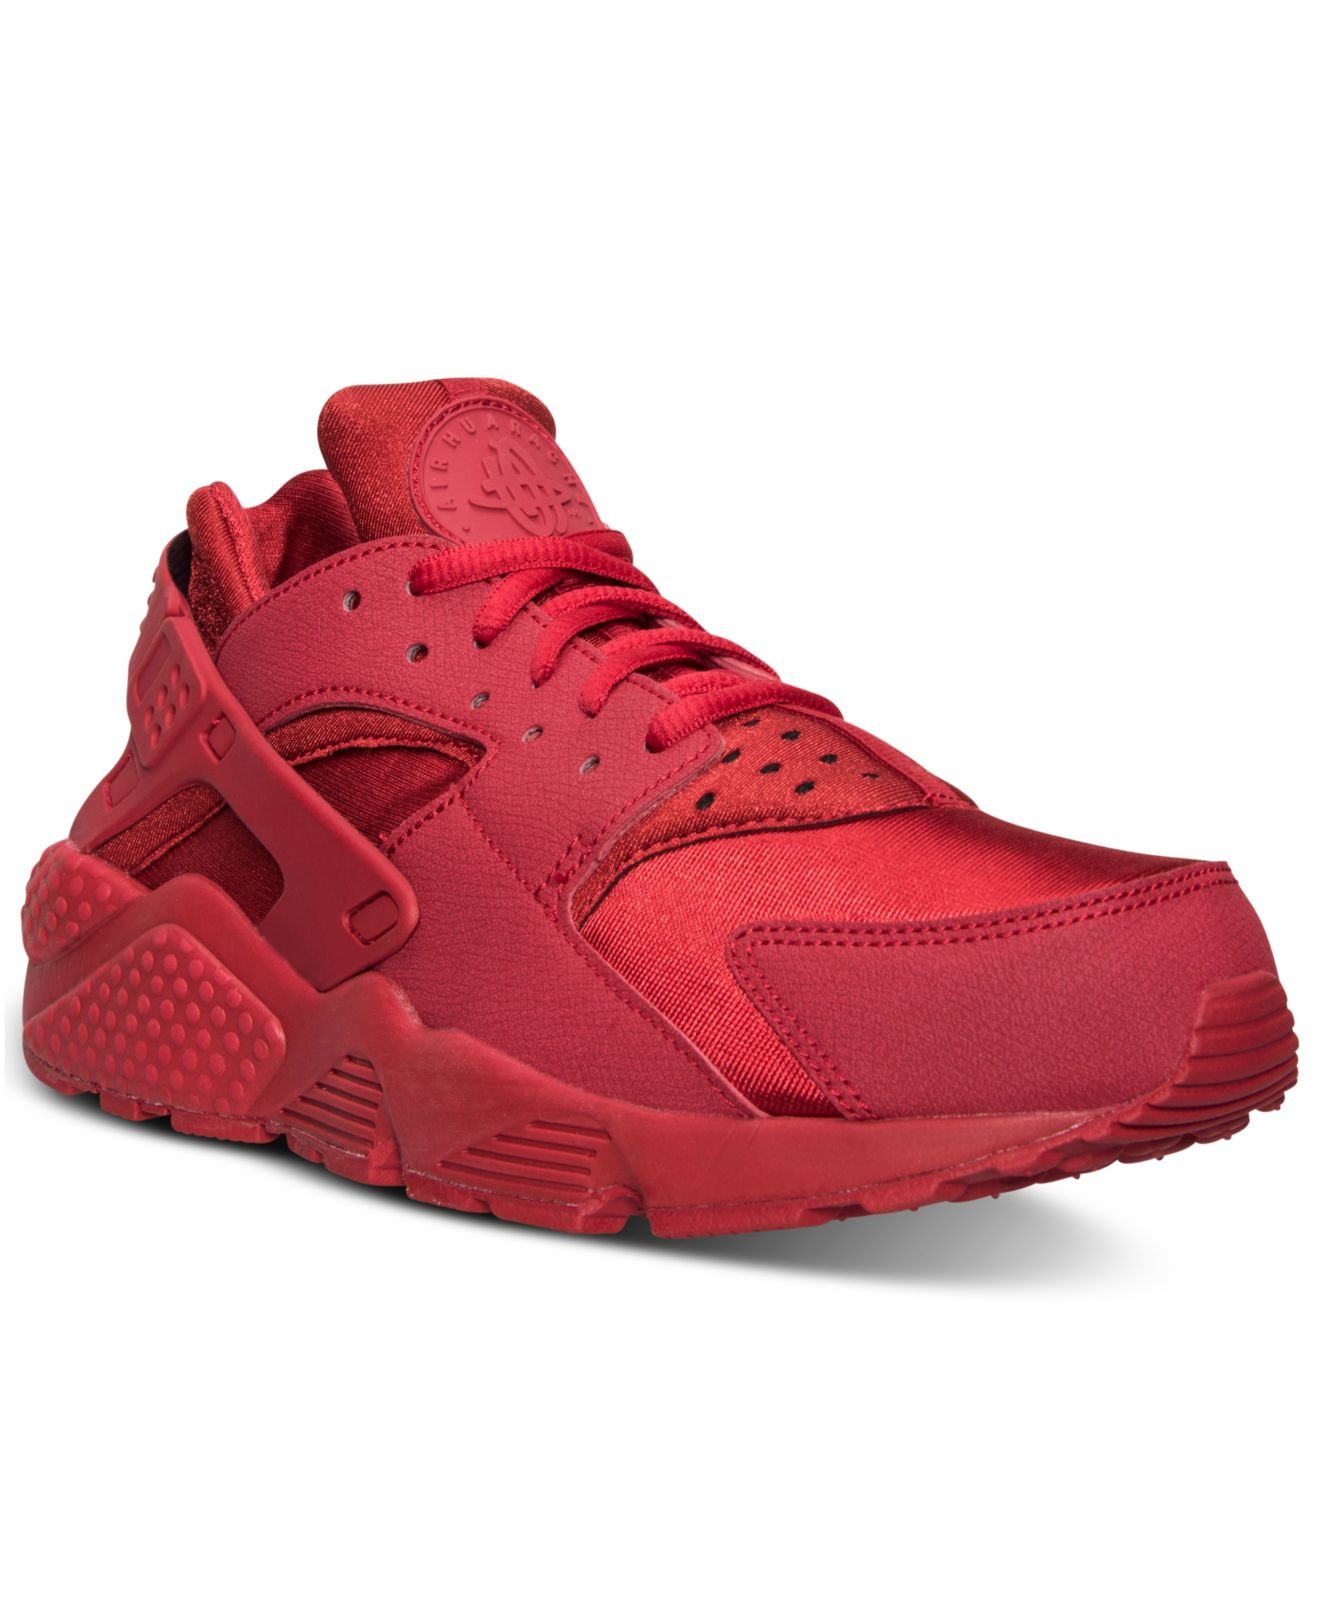 Nike Women's Air Huarache Run Running Sneakers From Finish Line in Red ...